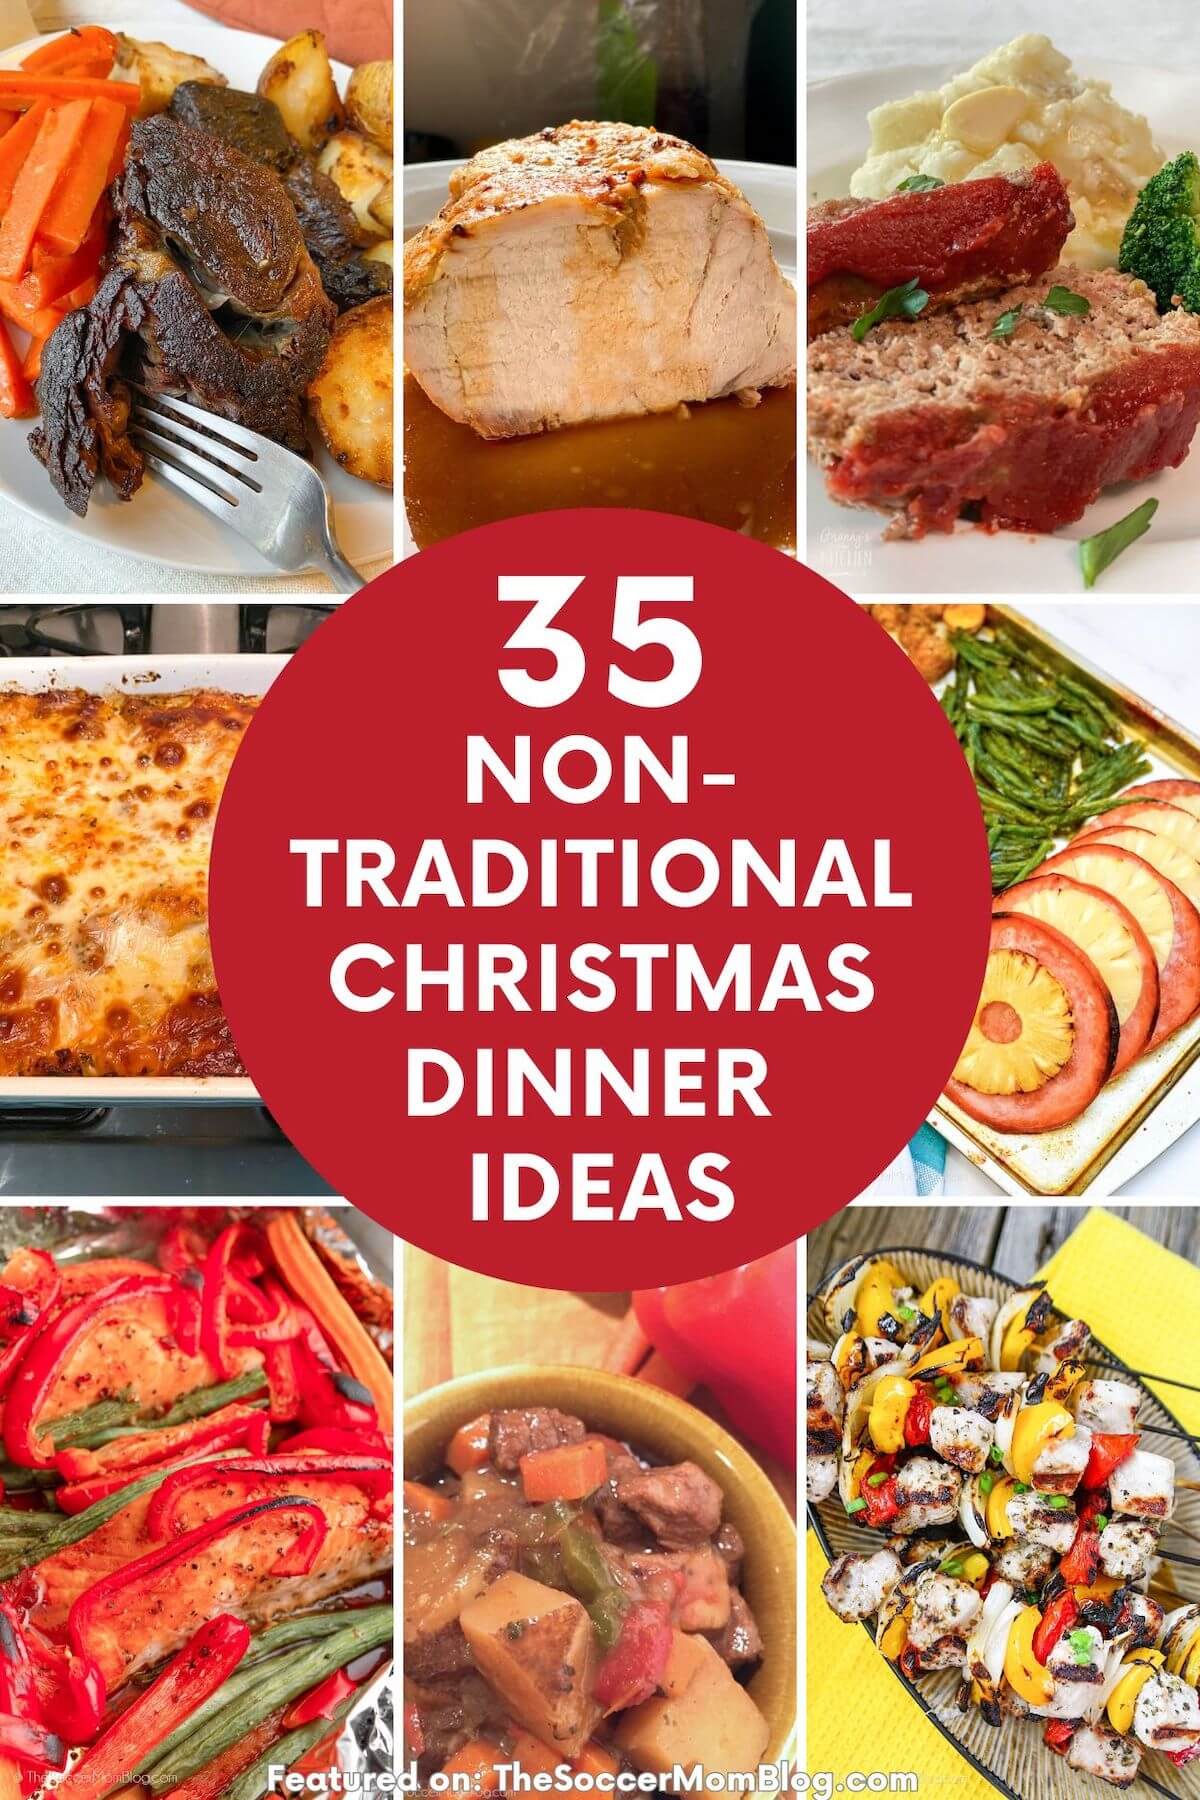 collage of dinner recipes; text overlay "35 Non-Traditional Christmas Dinner Ideas".